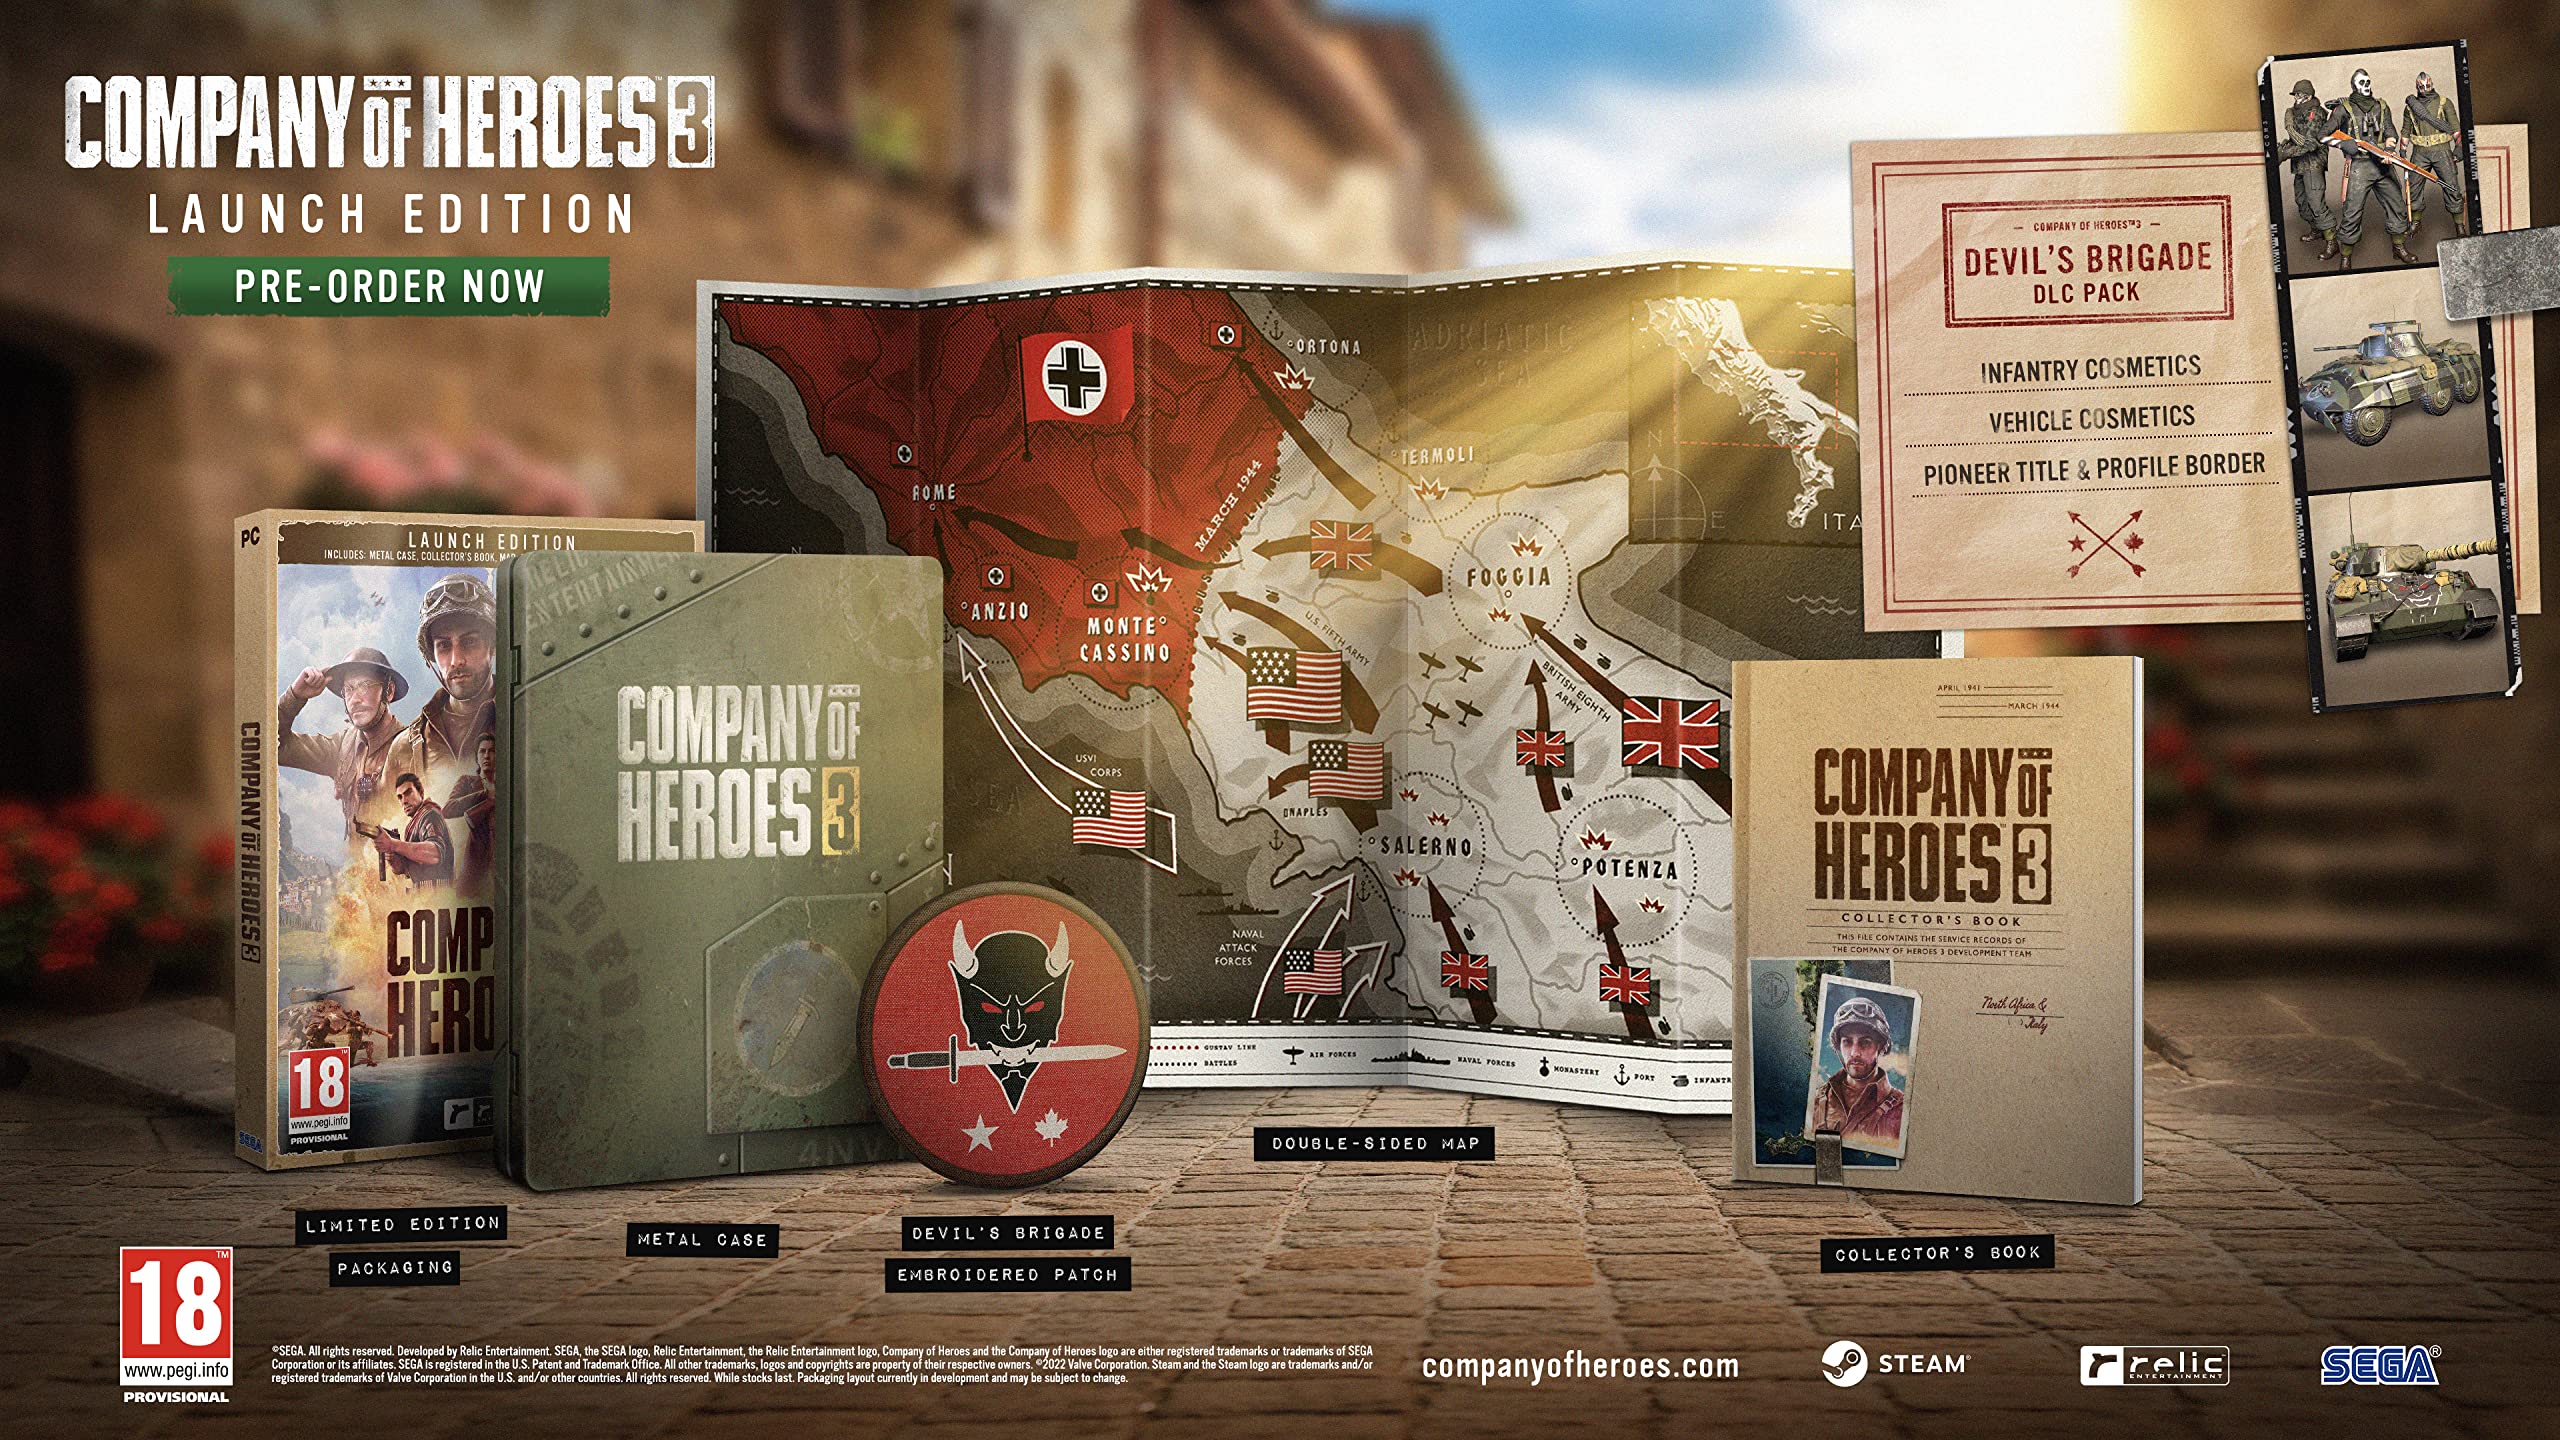 Company Of Heroes 3 Launch Edition With Metal Case